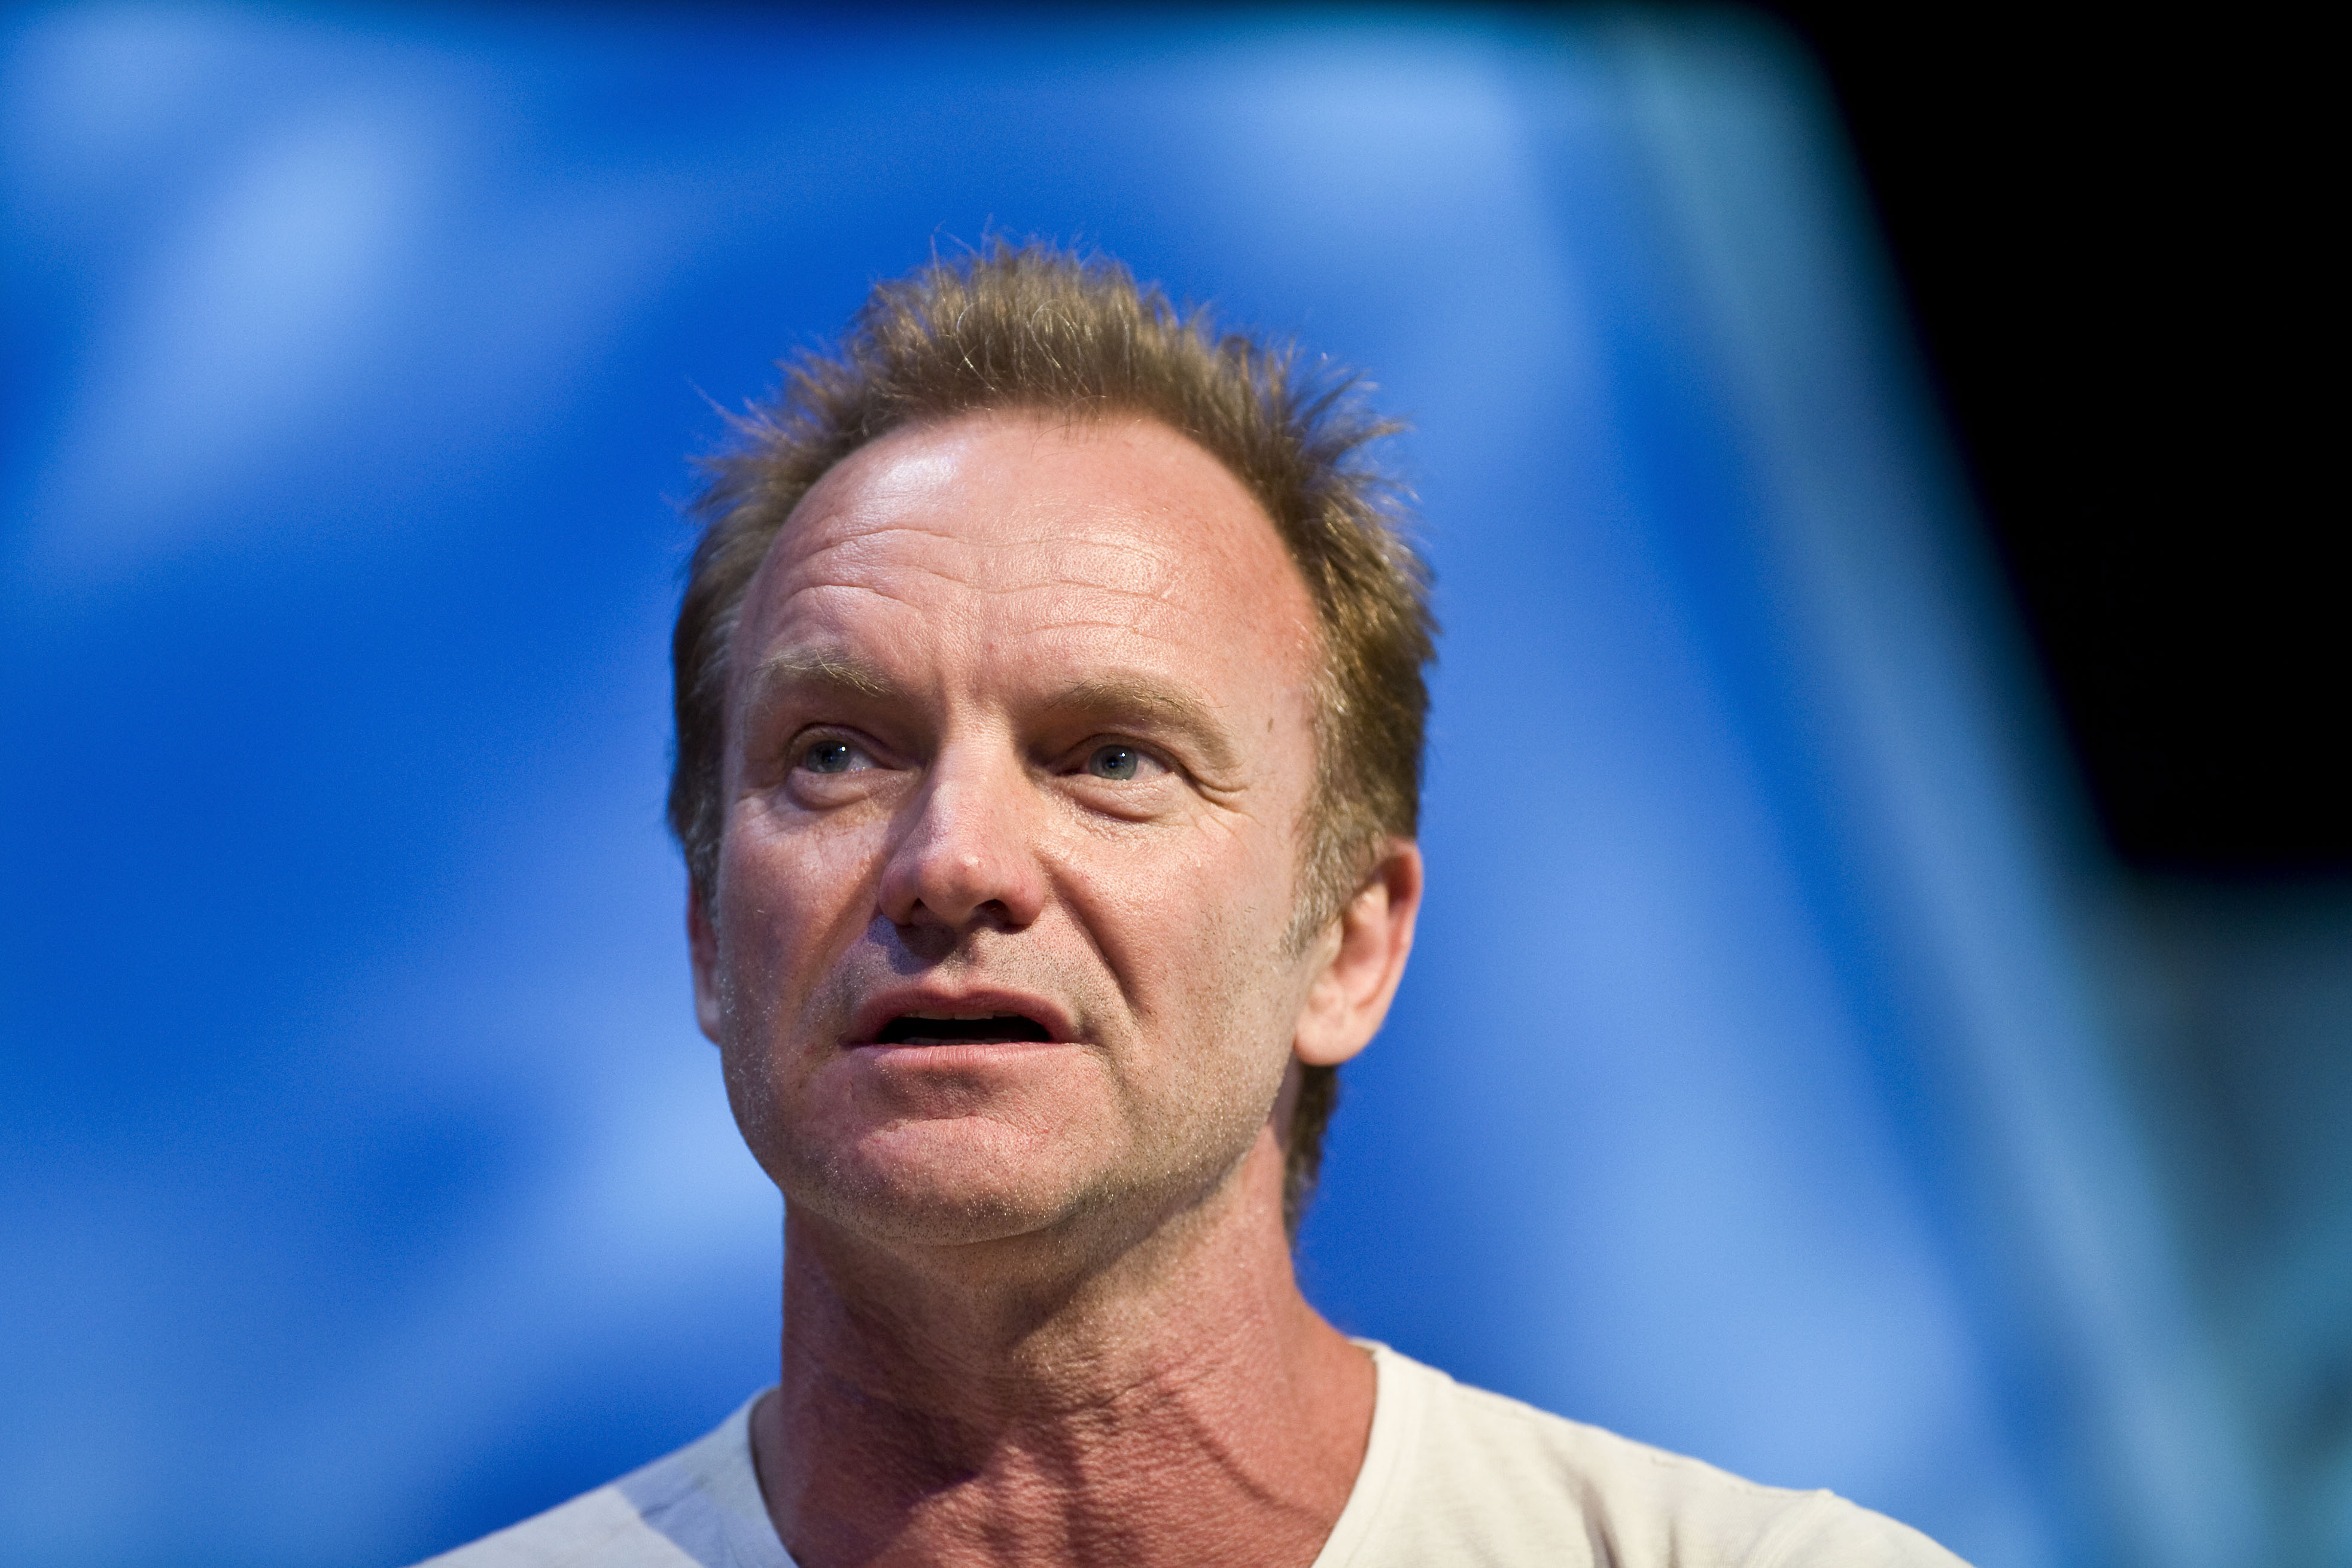 Sting on stage at the Hay festival, talking about his work on the film "Twin Spirits" in Hay-on-Wye, Wales on May 31, 2009. | Source: Getty Images